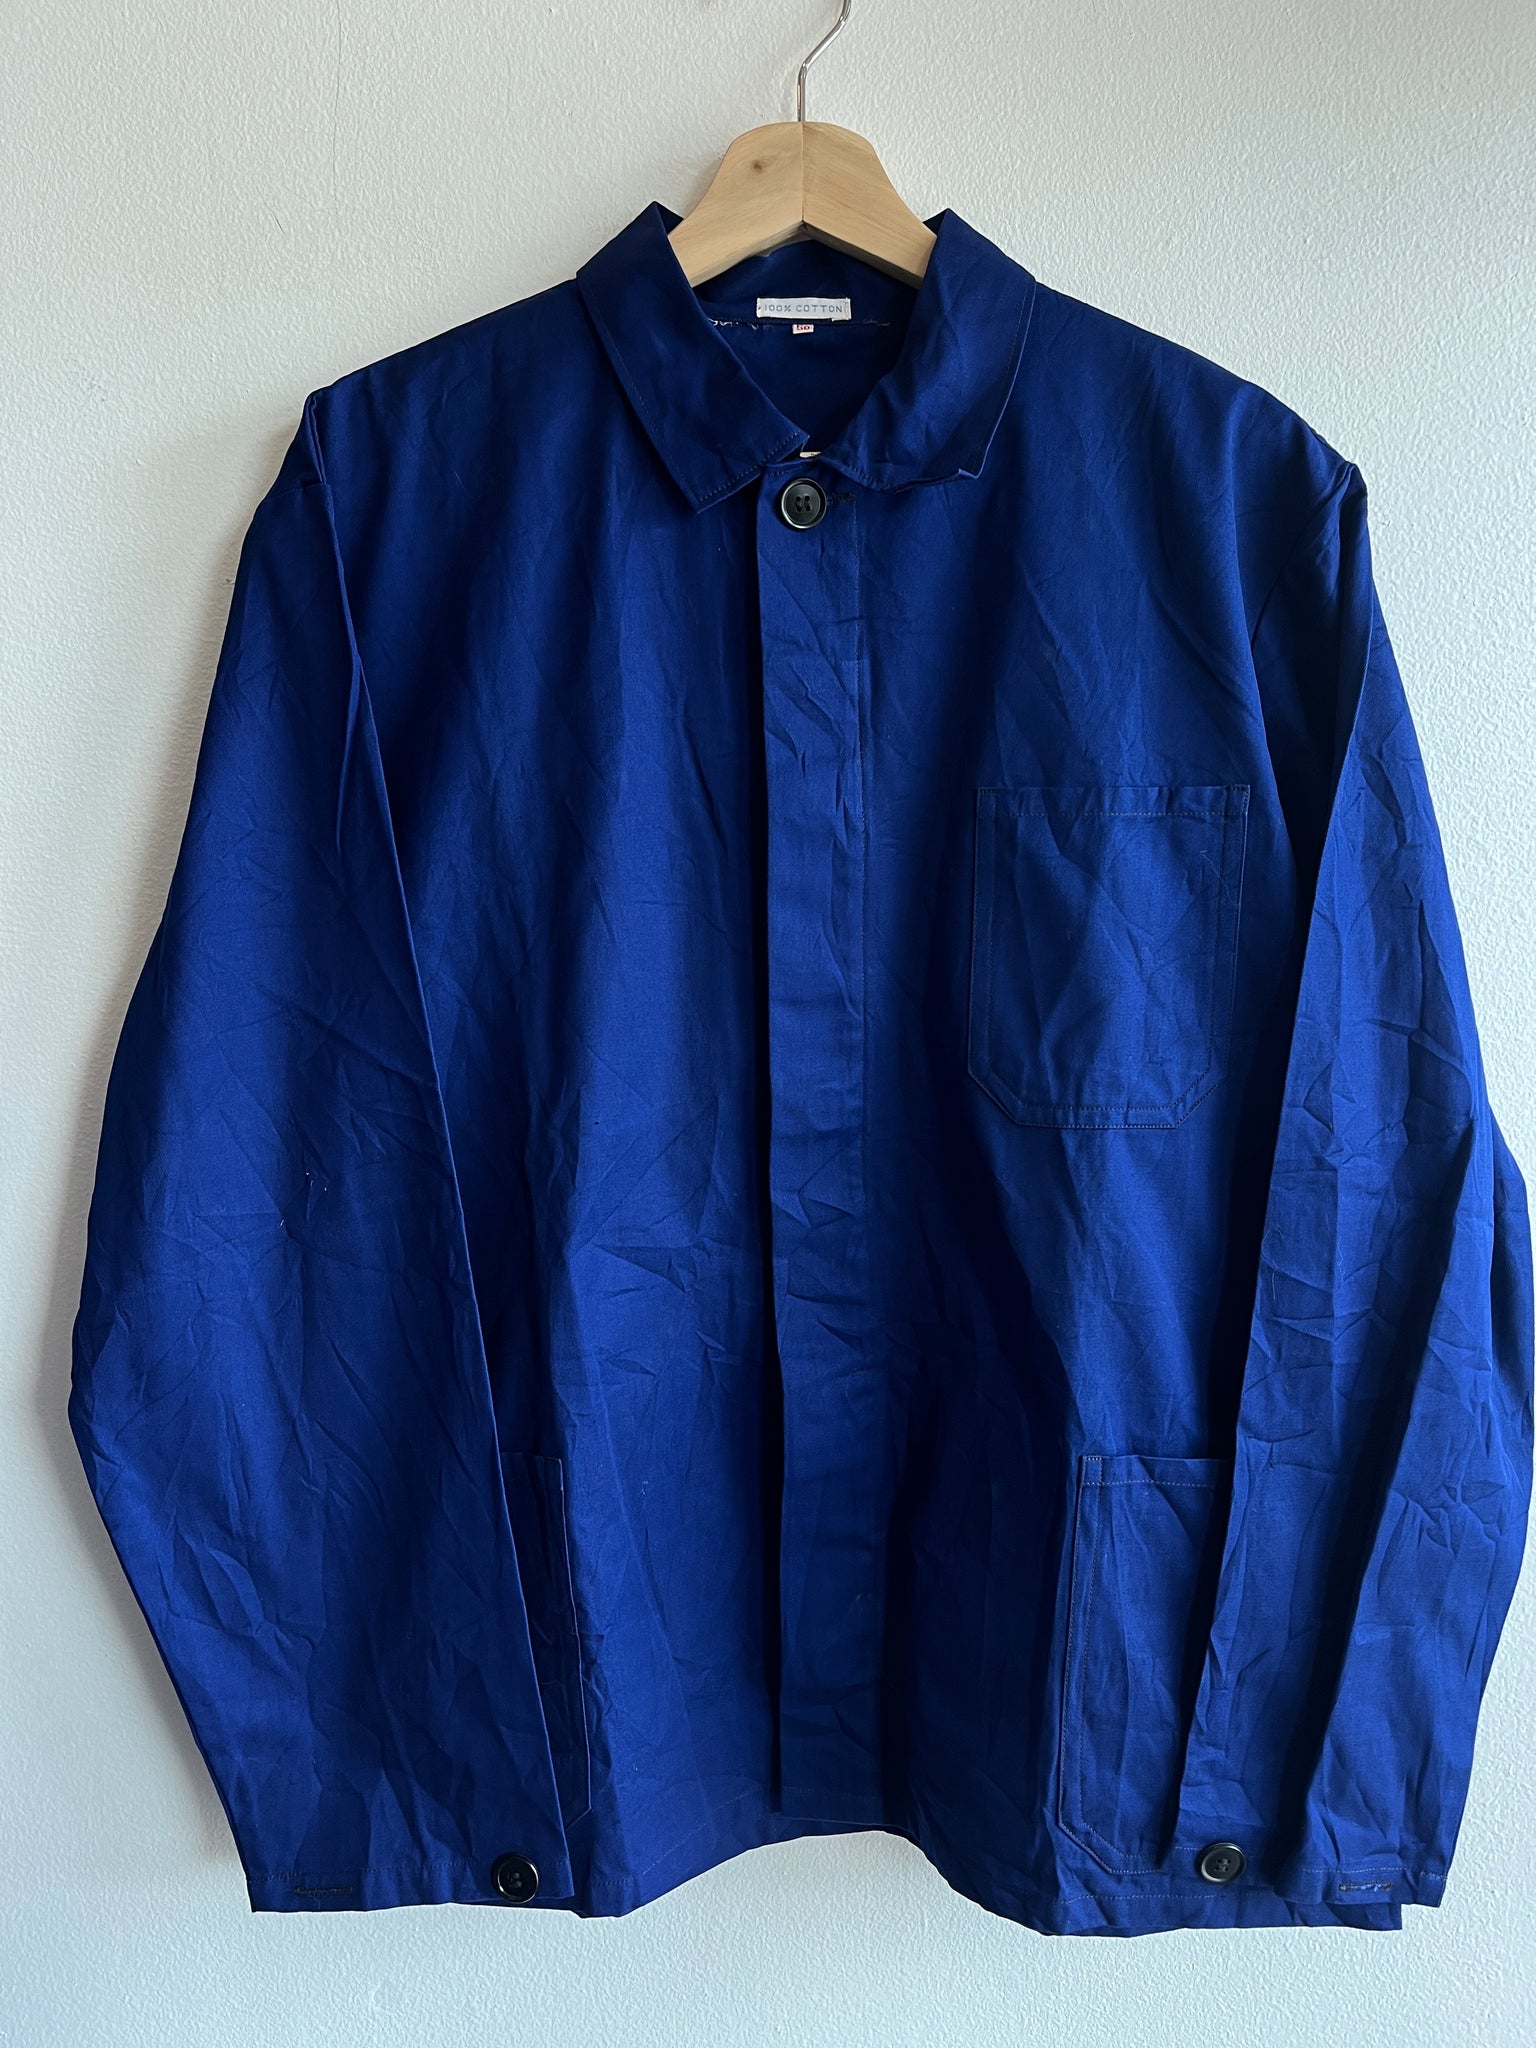 Vintage Deadstock 1970’s French Chore Coat